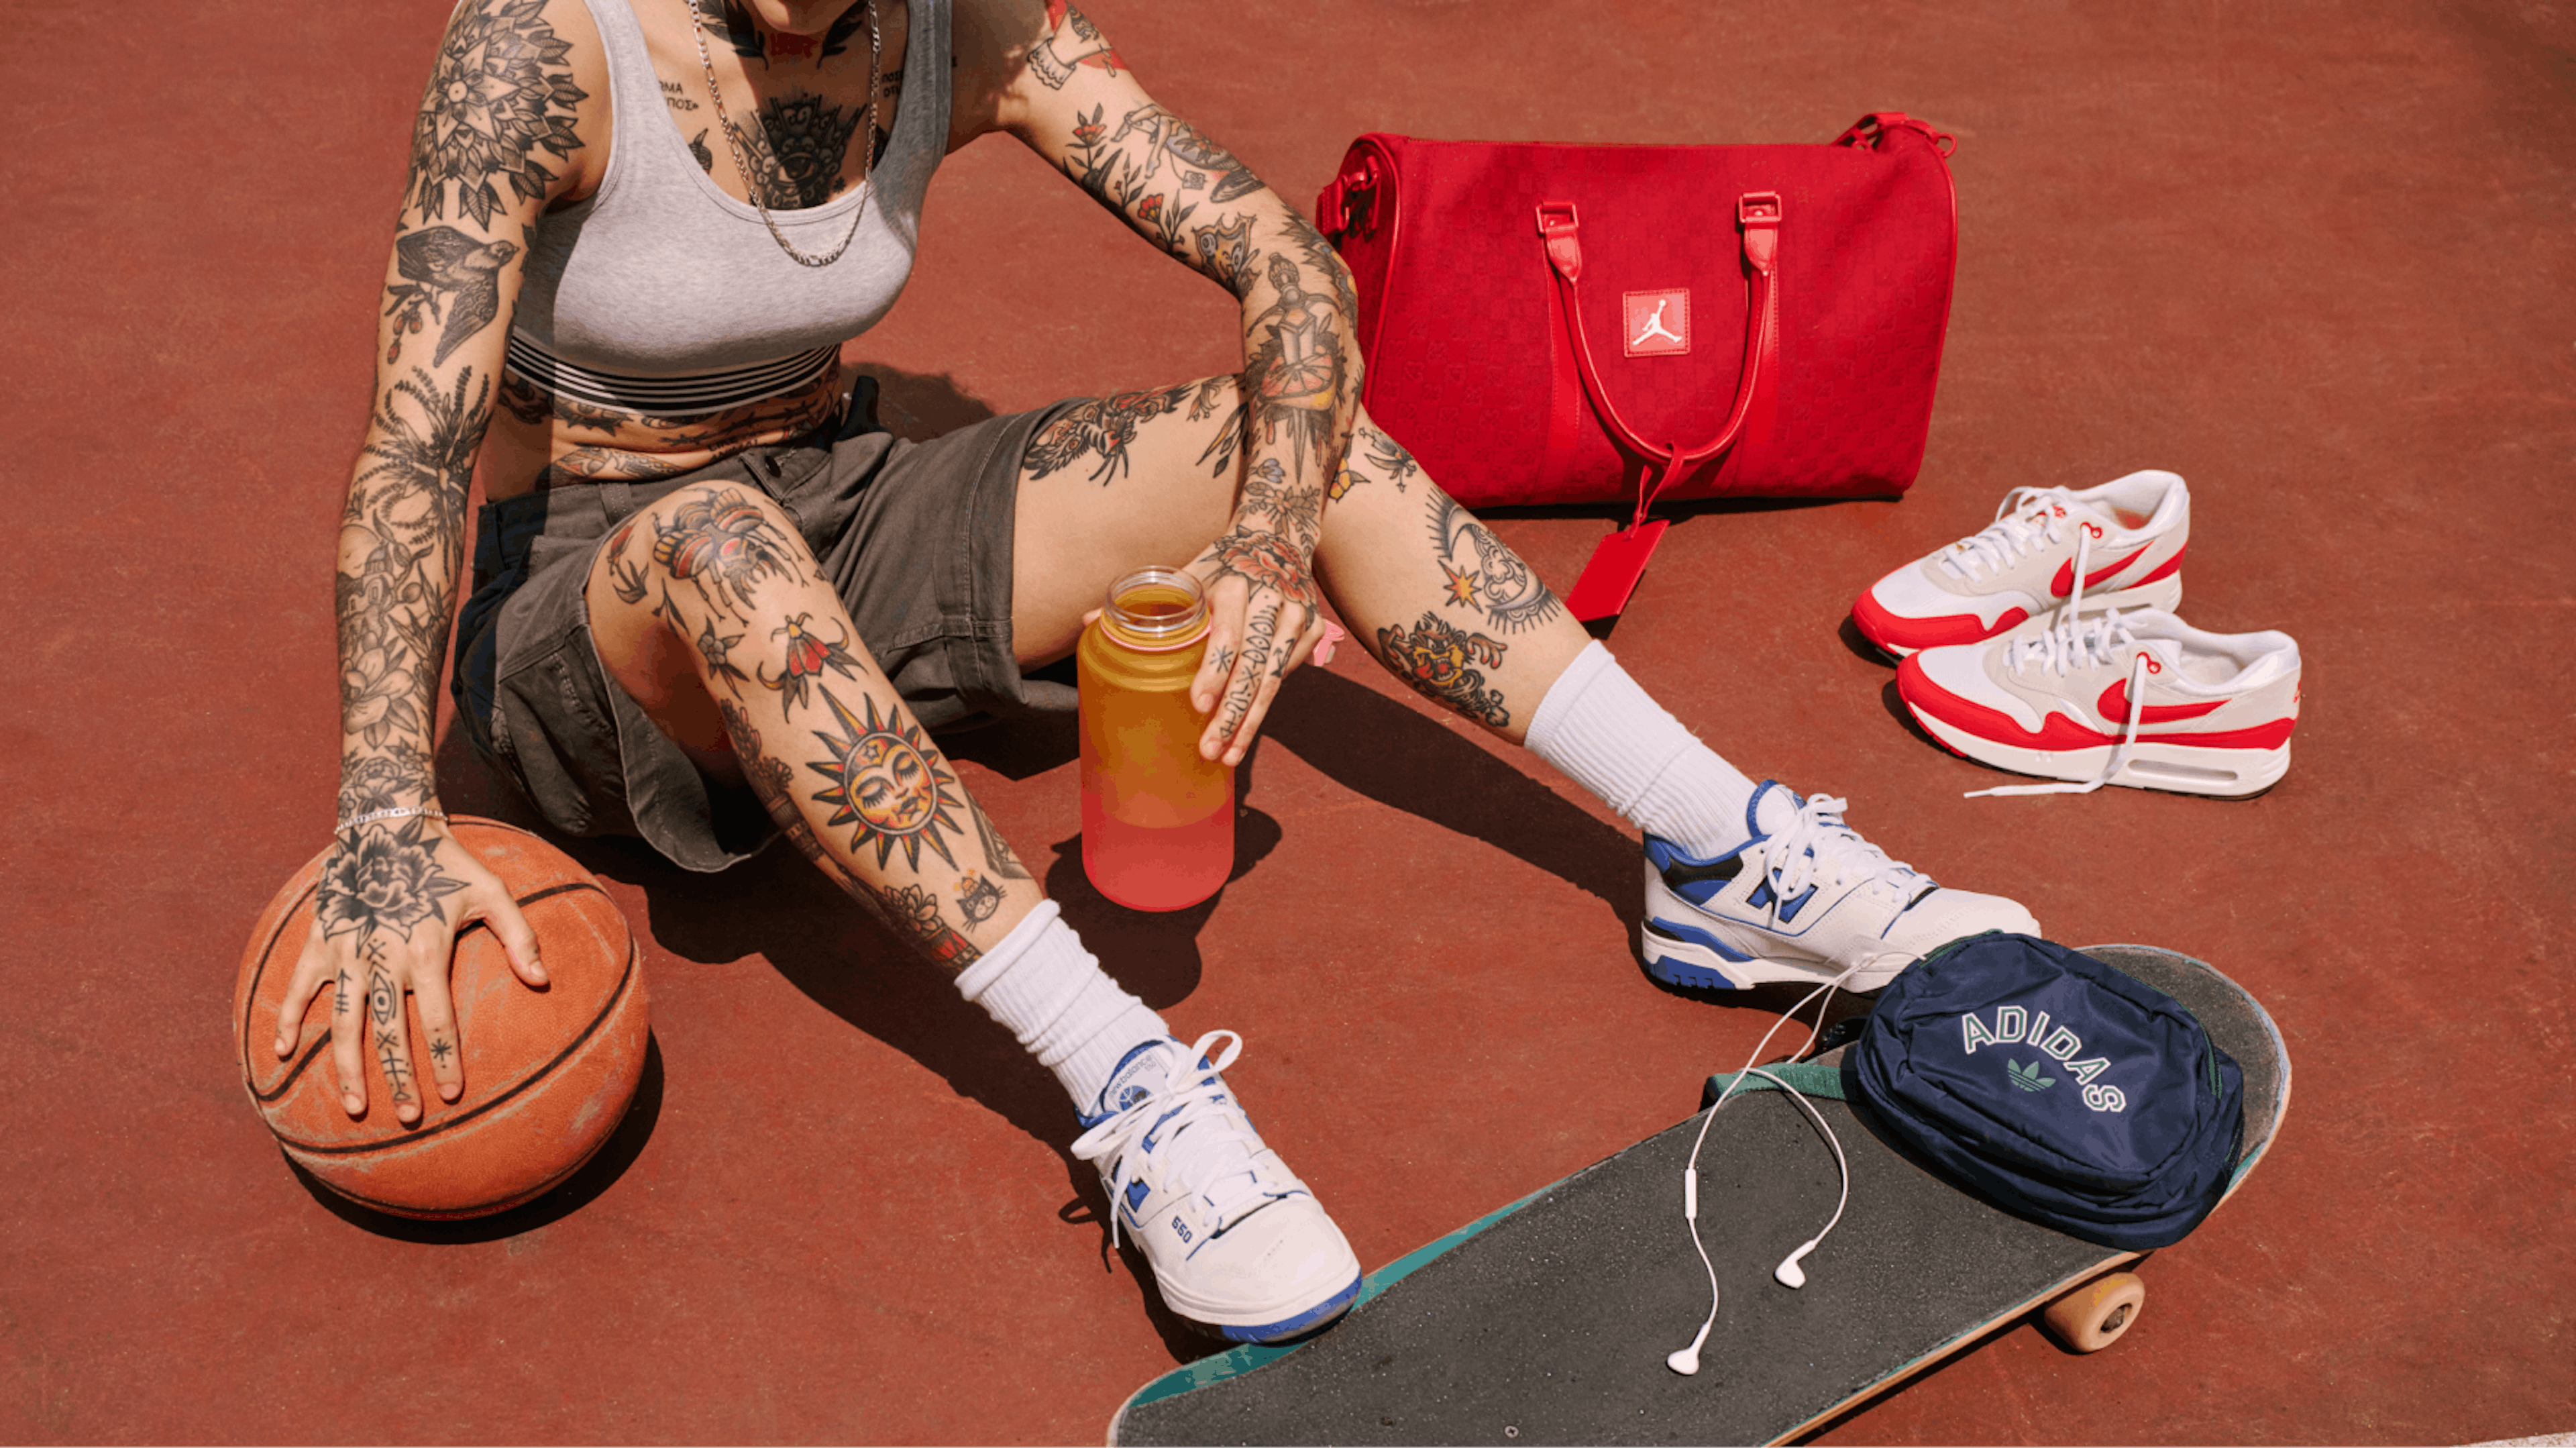 The image shows a person with numerous tattoos on their arms and legs sitting on a red surface, likely an outdoor court. They are wearing a gray sports bra, gray shorts, white socks, and blue and white sneakers. A basketball rests between their legs, and they hold a gradient water bottle. Beside them are a red sports bag, a pair of red and white sneakers, a blue Adidas pouch, and a skateboard with white earphones. The scene exudes a sporty and casual vibe.